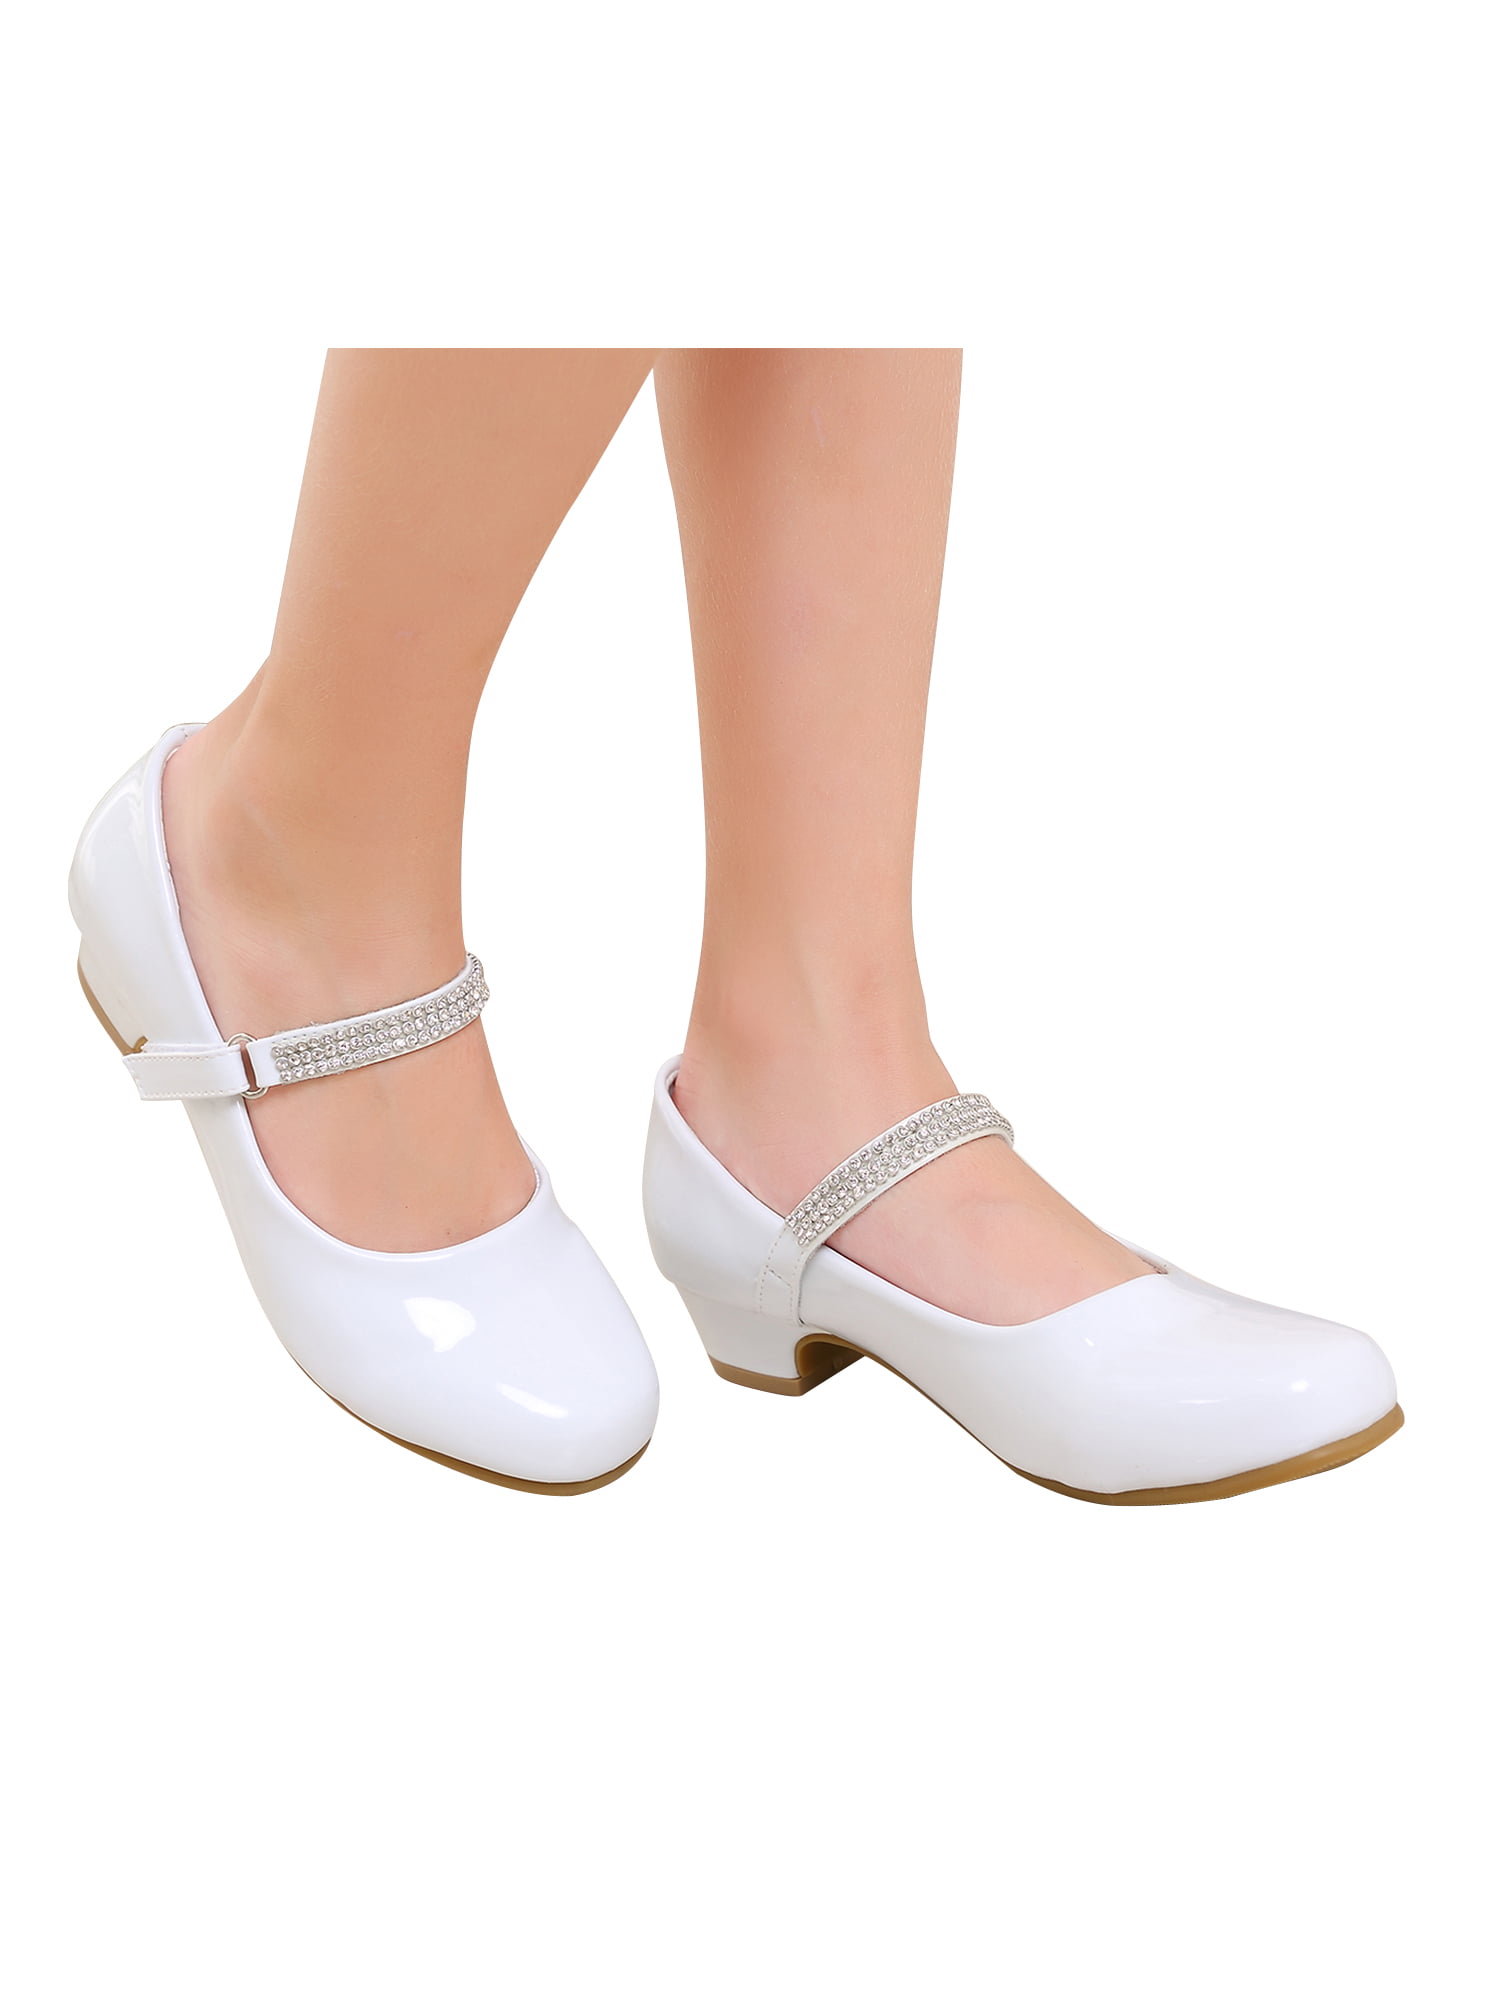 STELLE Girls Mary Jane Shoes Low Heel Party Dress Shoes for Kids 